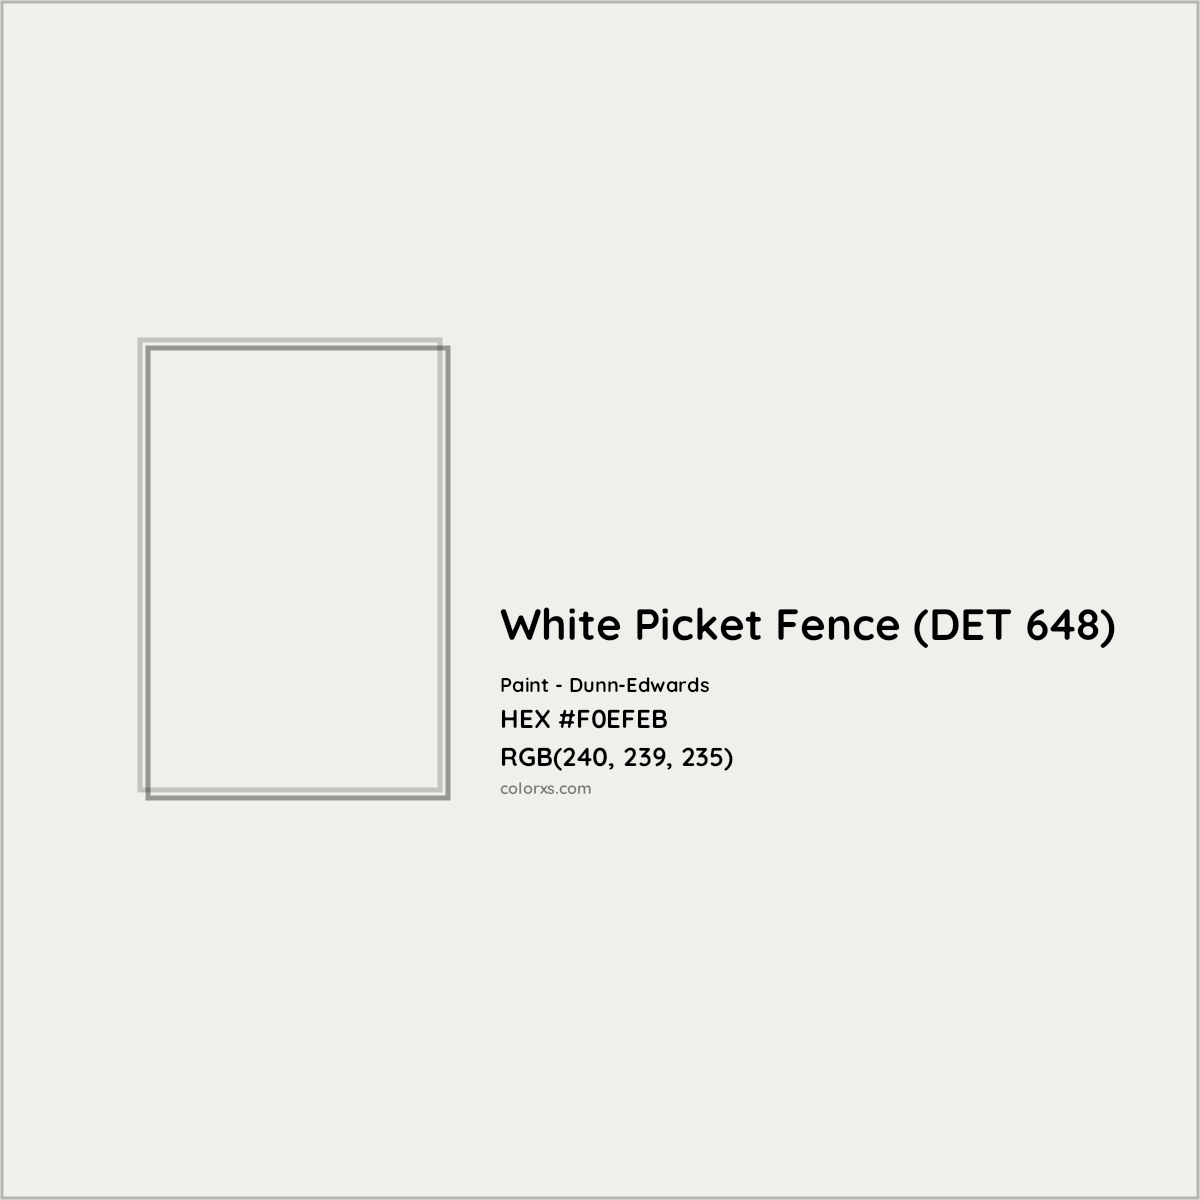 HEX #F0EFEB White Picket Fence (DET 648) Paint Dunn-Edwards - Color Code